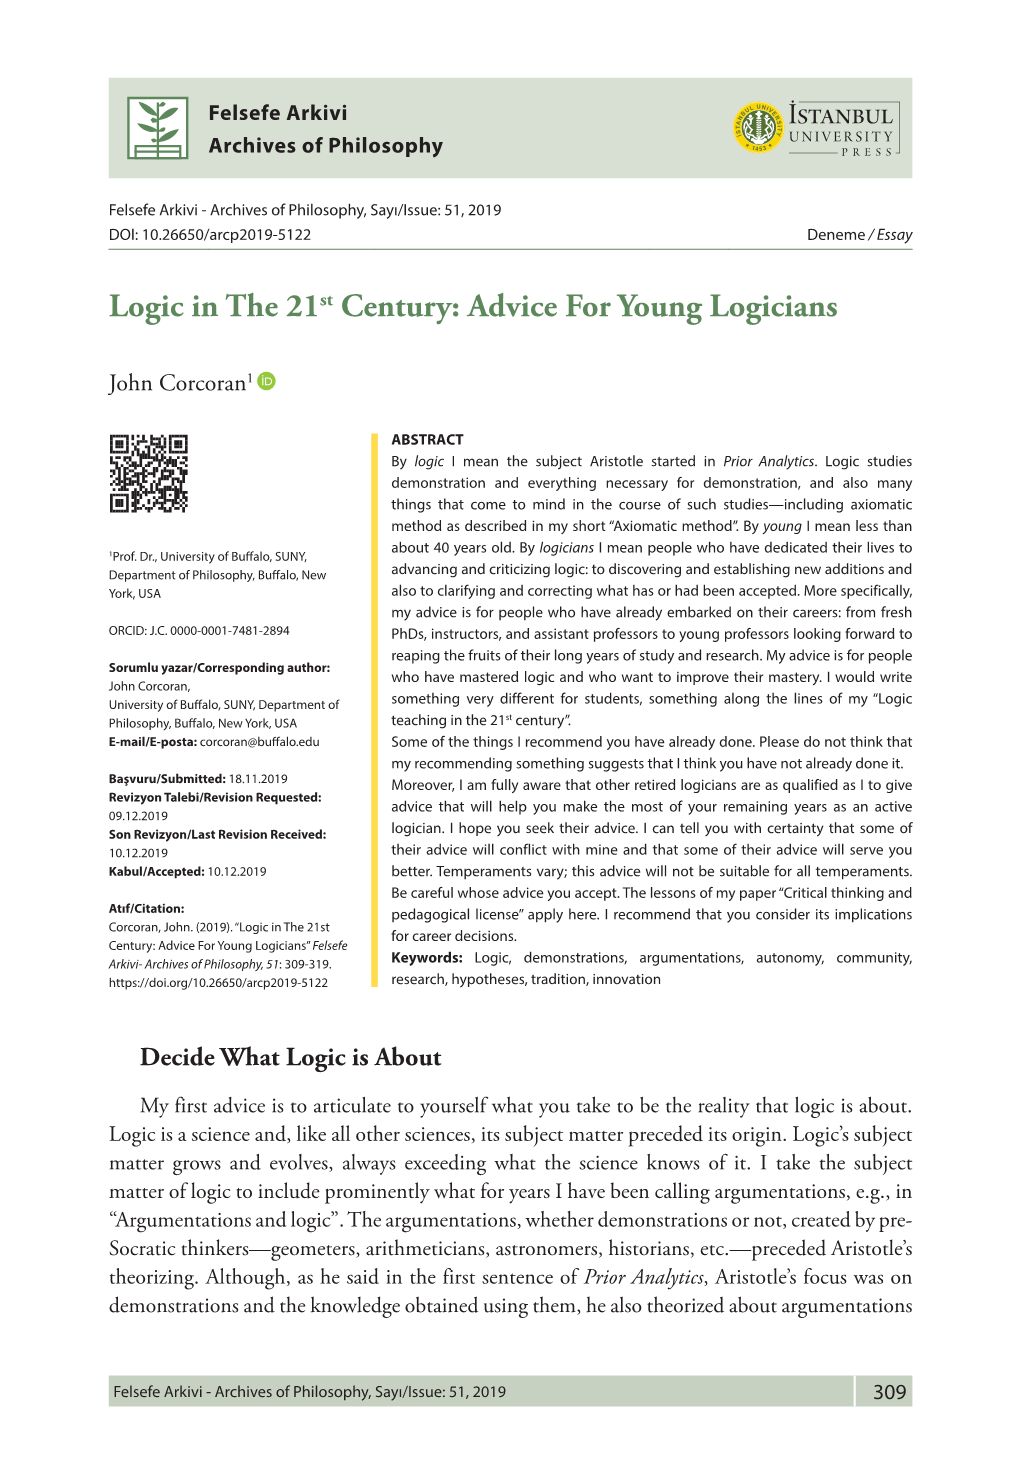 Logic in the 21St Century: Advice for Young Logicians